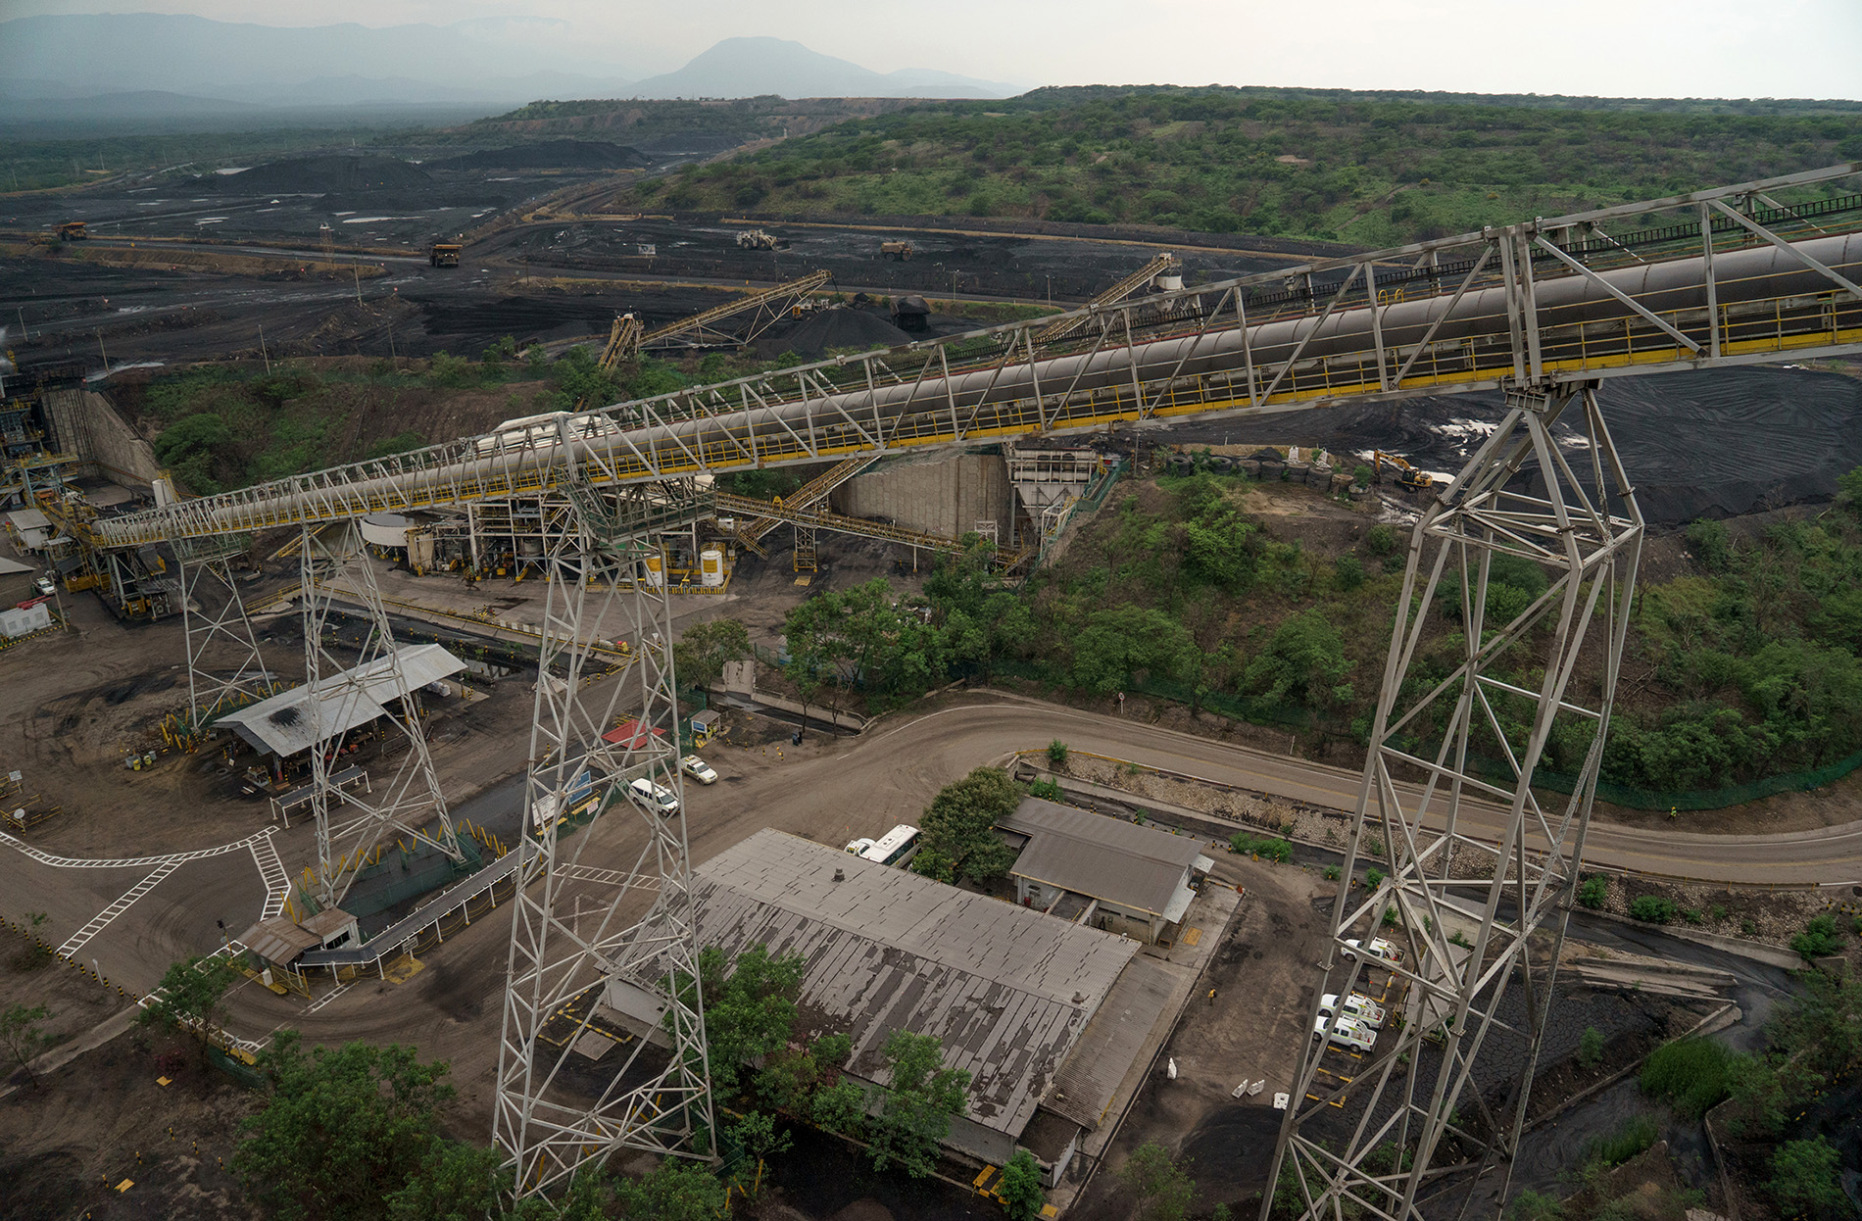 Coal is transported on a conveyor belt to silos at the Cerrejon coal mine complex near the village of Albania, Colombia.
